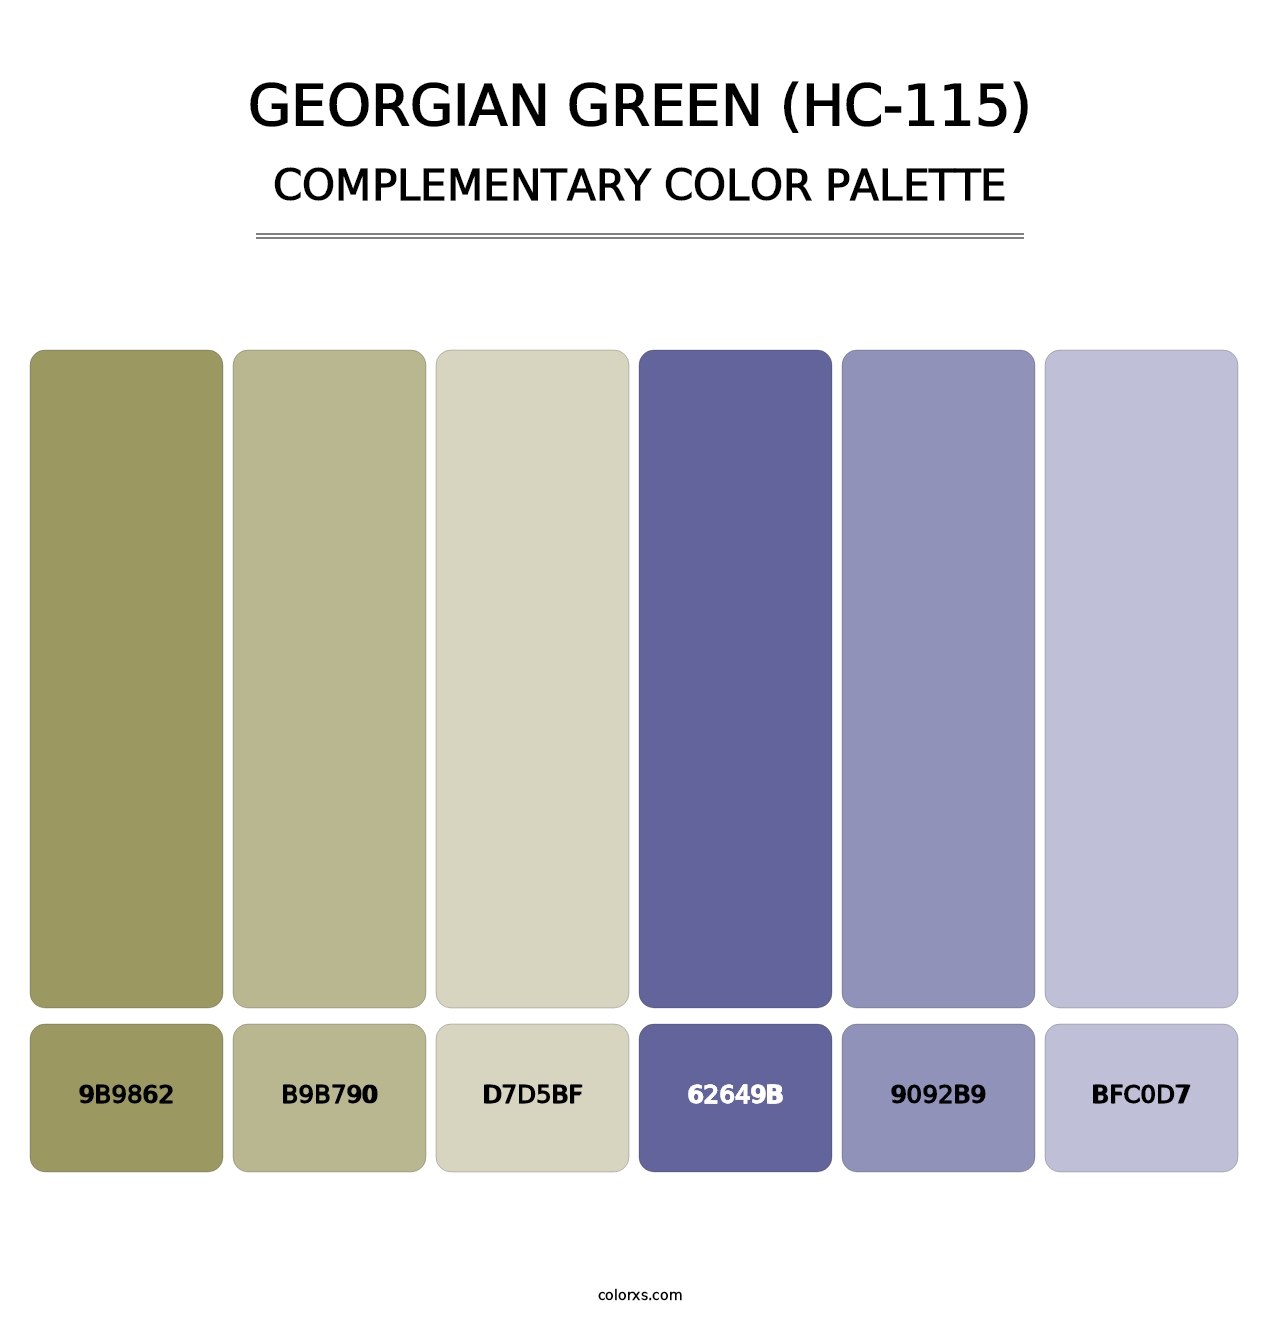 Georgian Green (HC-115) - Complementary Color Palette